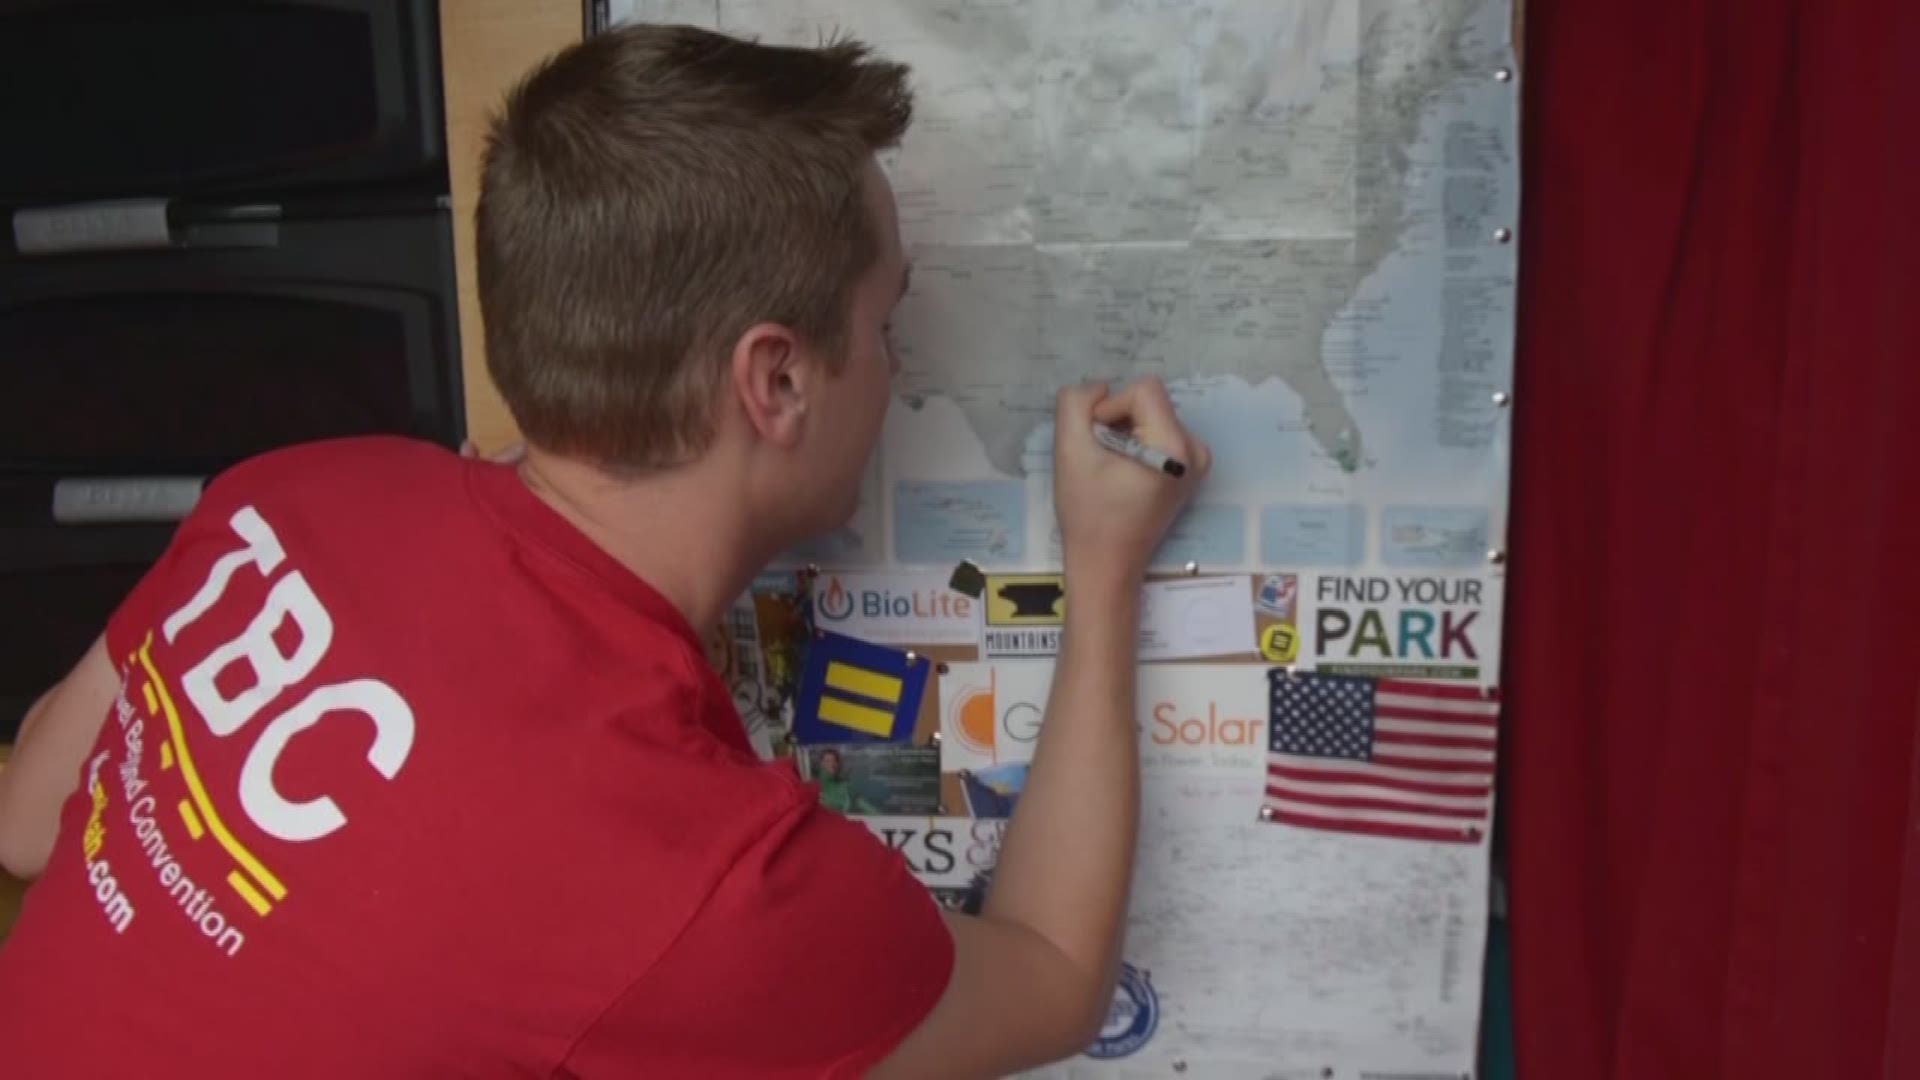 Mikah Meyer is attempting to beat a world record by visiting the more than 400 National Park Service sites in honor of his father.